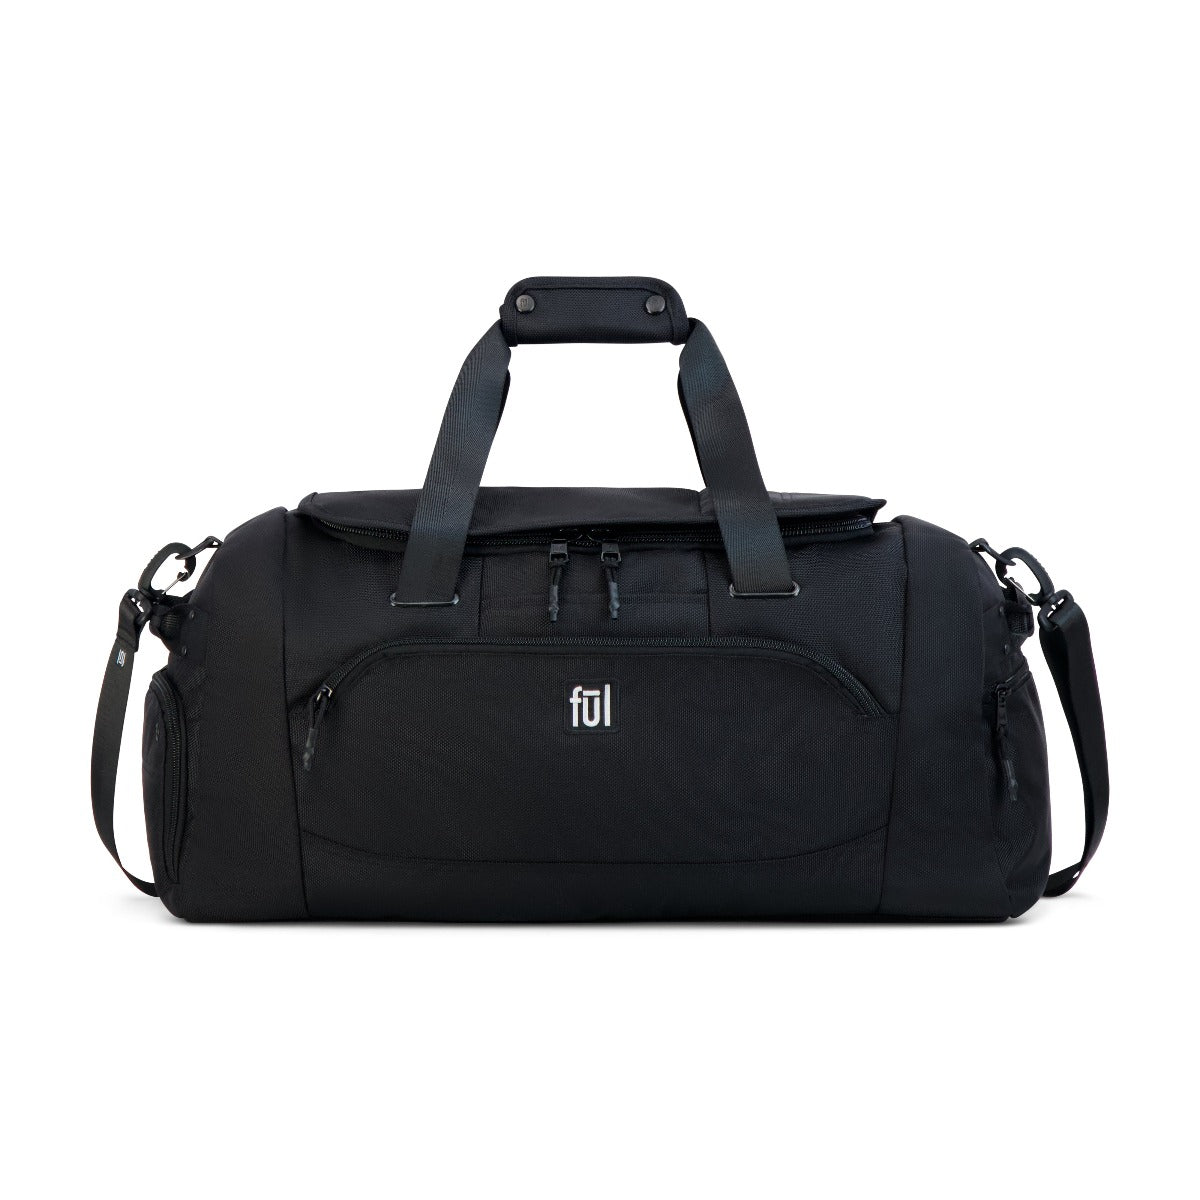 ful tactics collection siege duffle bag black - best gym duffel bags for working out